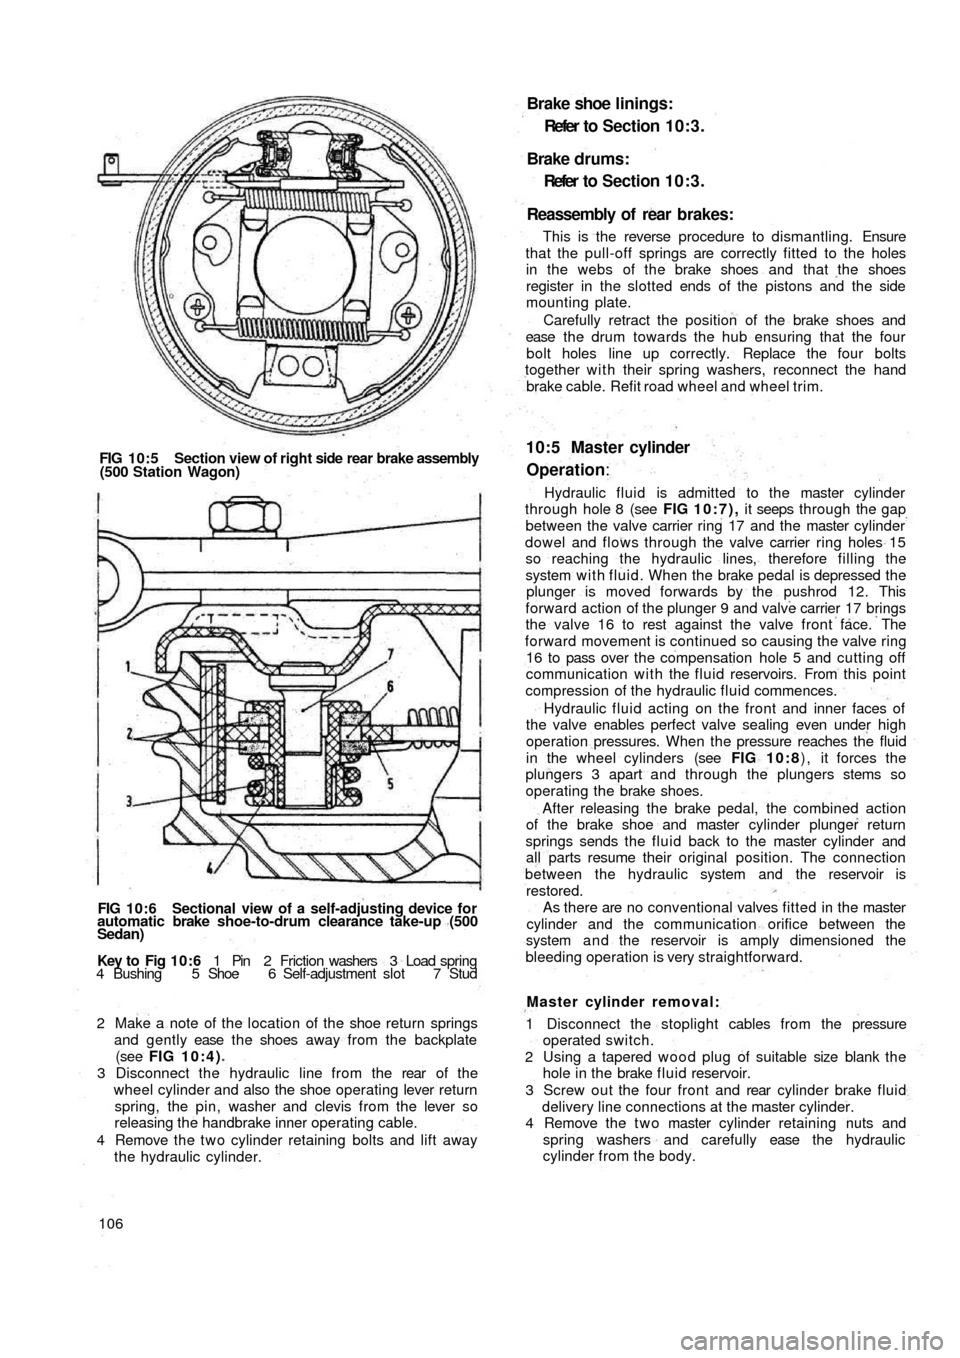 FIAT 500 1970 1.G Workshop Manual FIG 10:5 Section view of right side rear brake assembly
(500 Station Wagon)
FIG 10:6 Sectional view of a self-adjusting device for
automatic brake shoe-to-drum clearance take-up (500
Sedan)
Key  to   